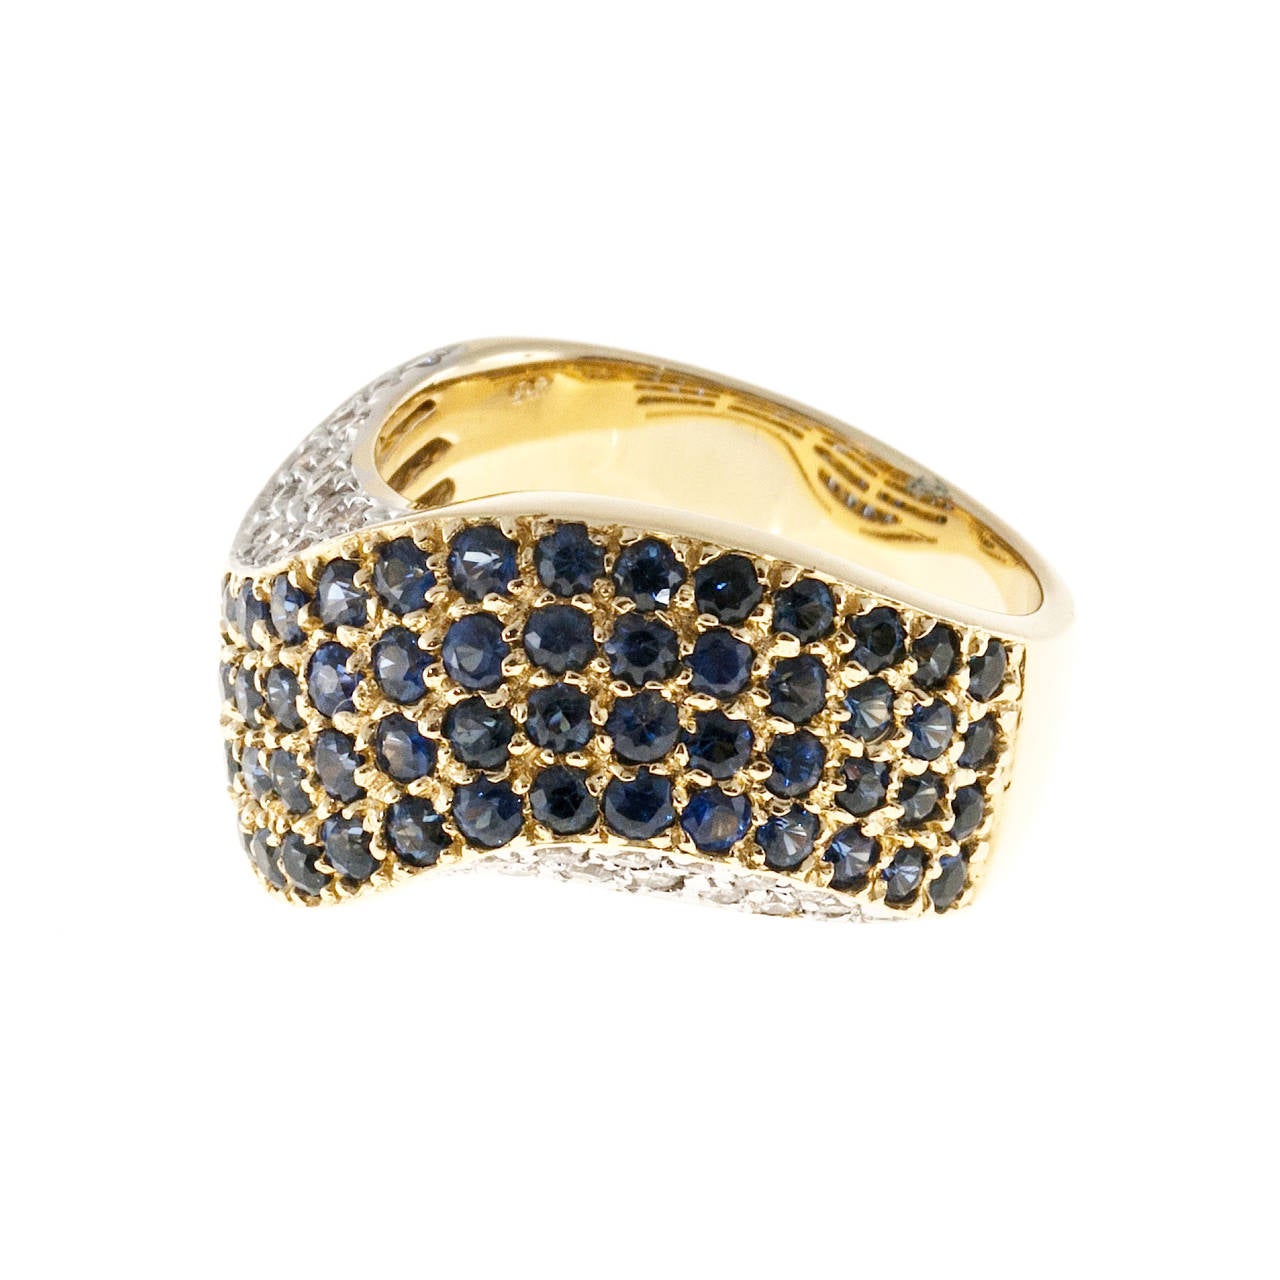 sapphire and diamond swirl band ring. Tapered slightly domed swirl ring with a little bit of twist. Solid 14k yellow gold. The top is pave set with 5 rows of genuine bright sapphires. Each side is pave set with 3 rows of well-cut bright white full